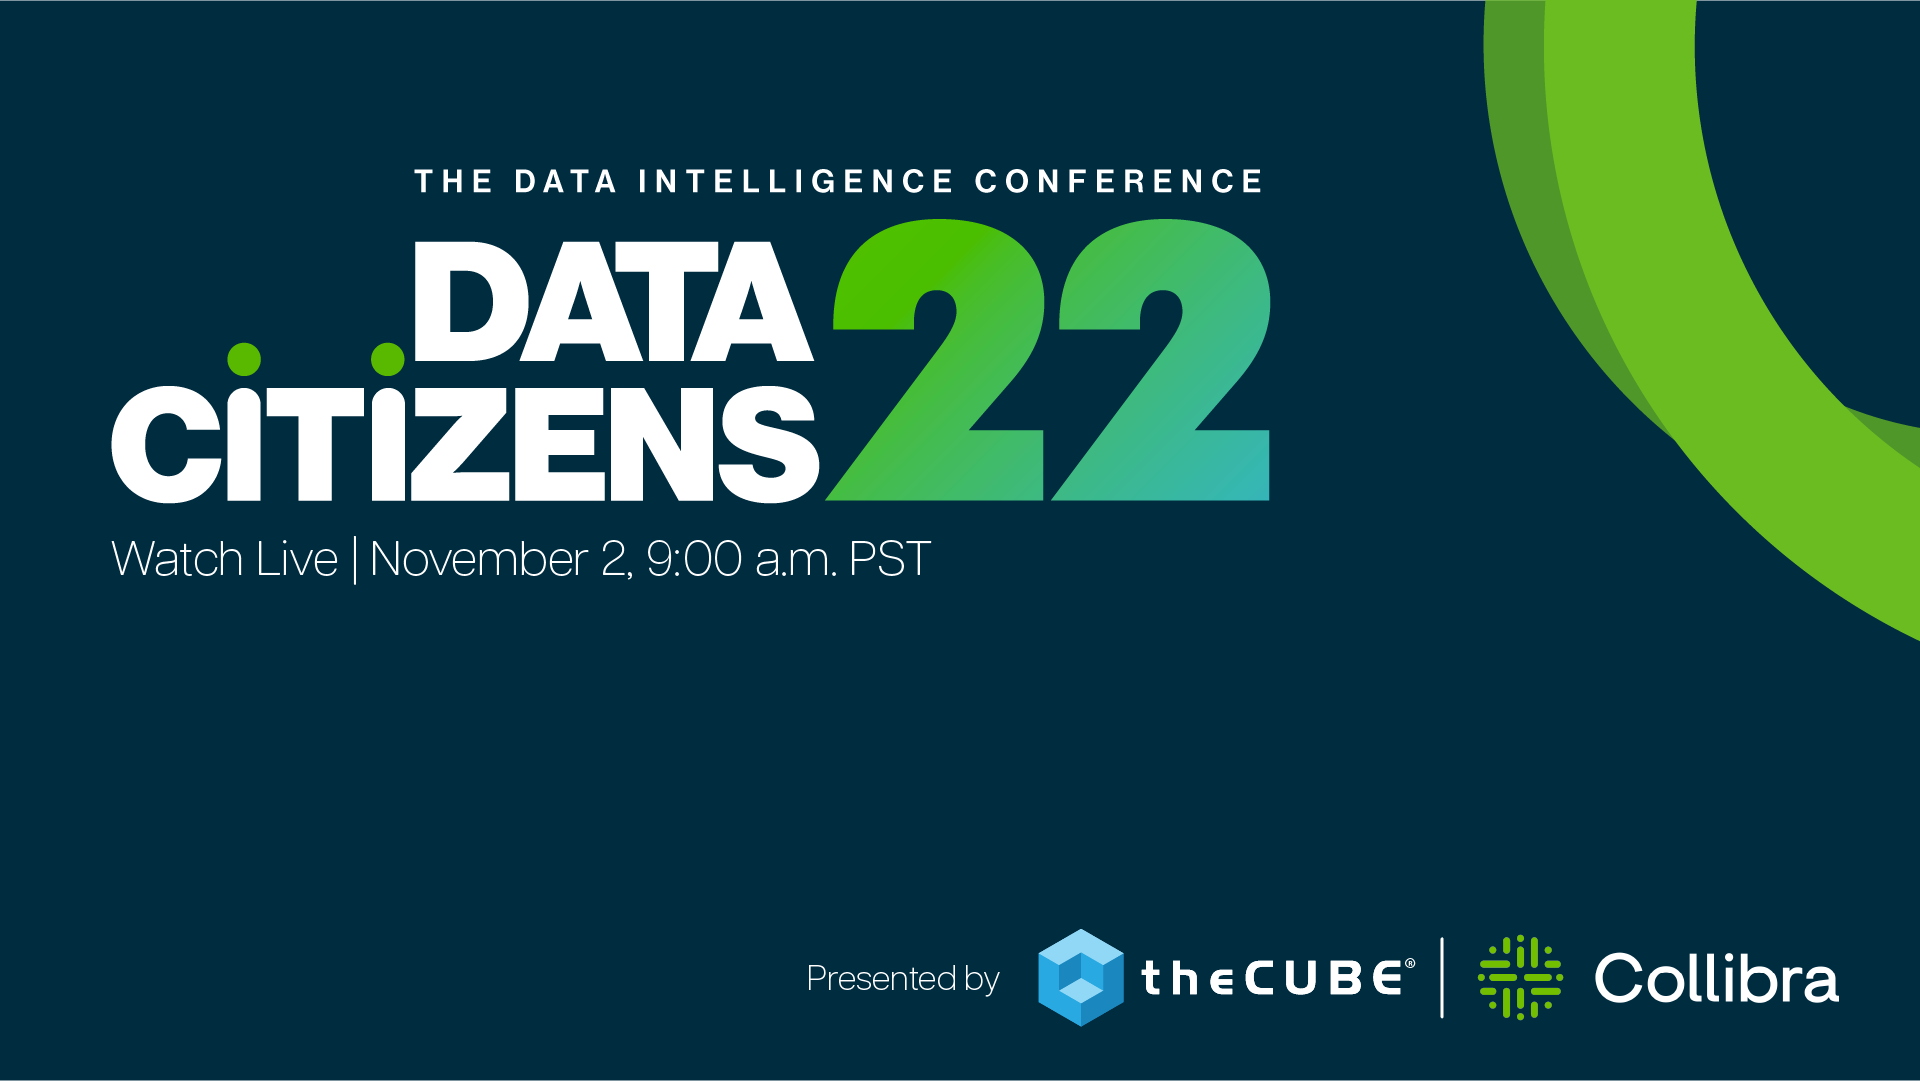 What to expect during the ‘Data Citizens’ event: Join theCUBE Nov. 2